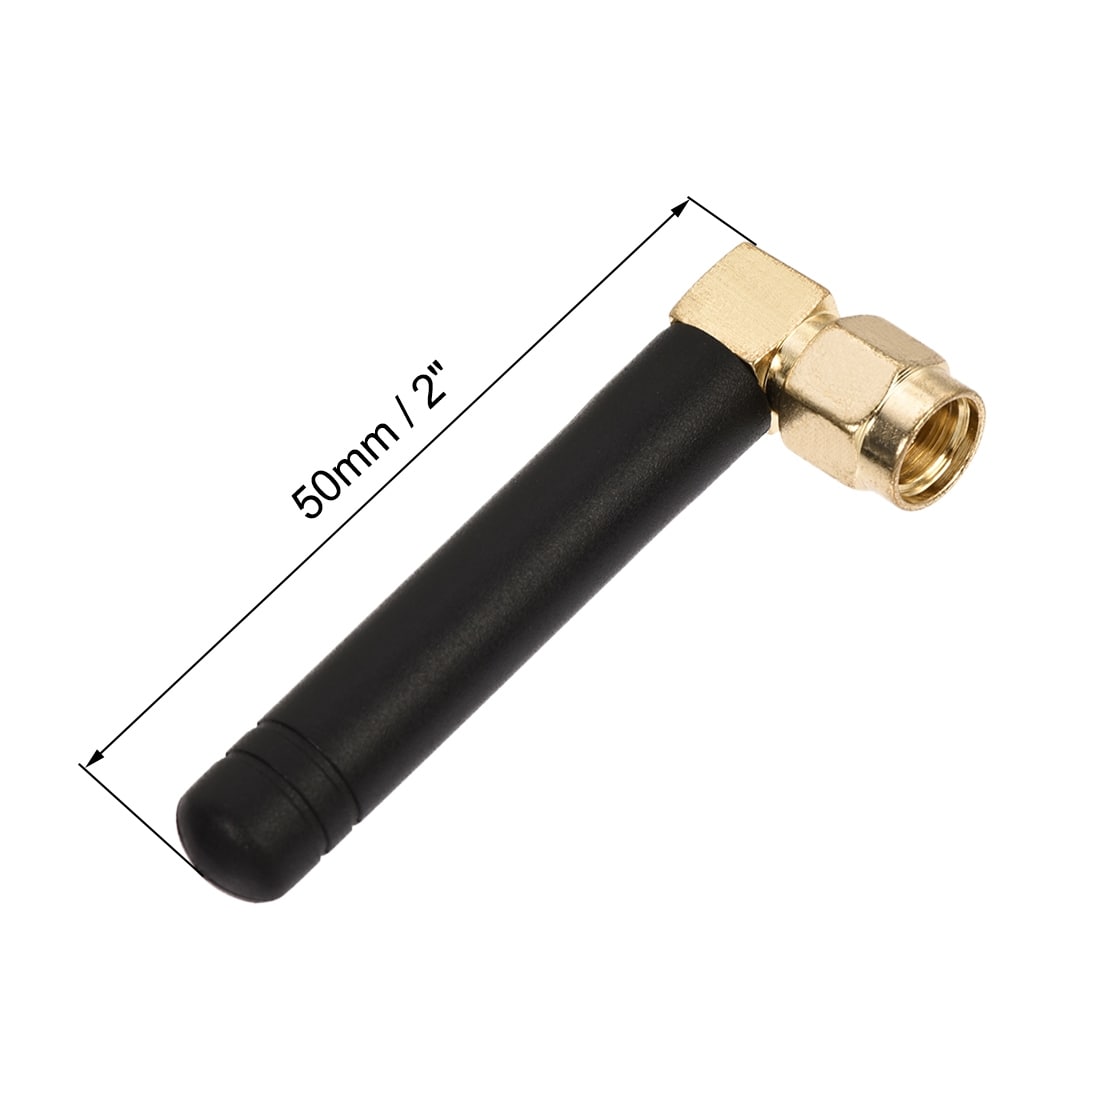 sourcing map Mini Antenna 4dBi High Gain 868MHz RP-SMA Male Right Angle Connector Omni Direction Aerial 50mm Length